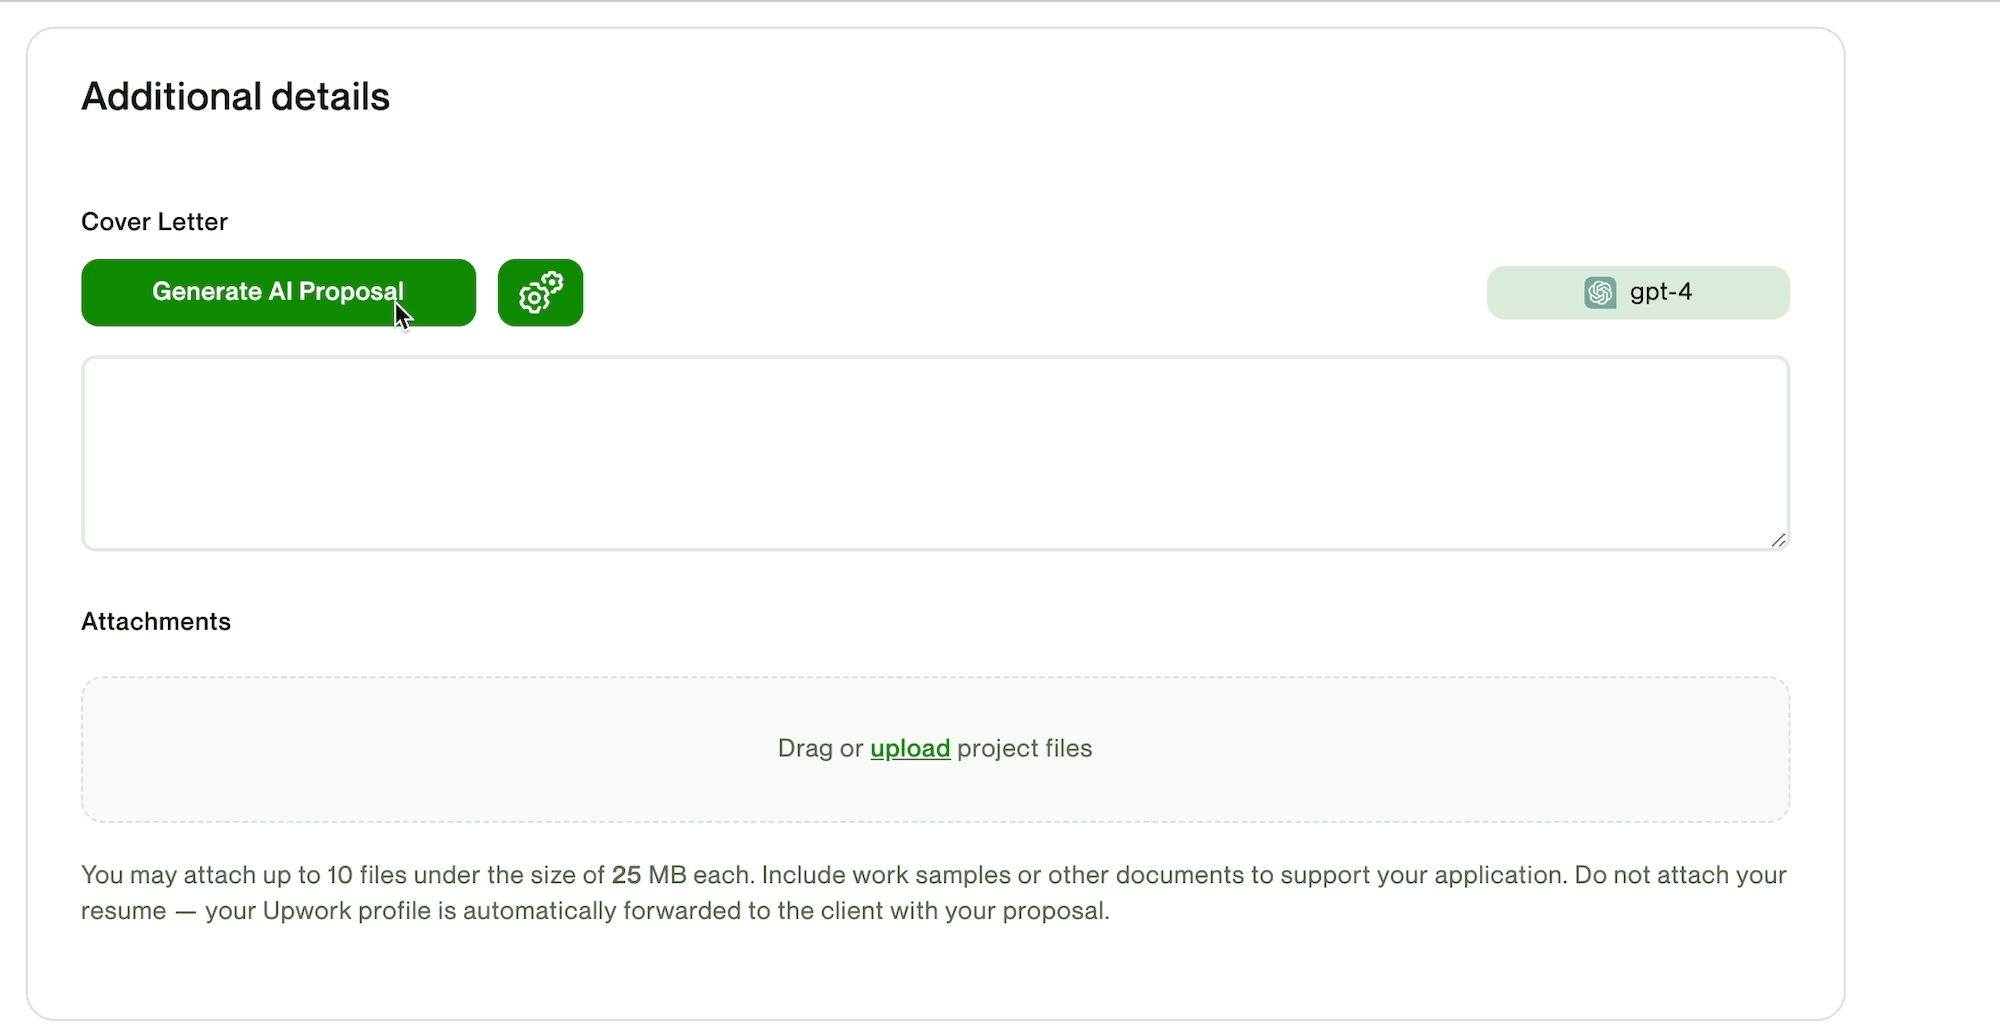 Automatic upwork proposal generator based on job post analysis. It helps freelancers and companies create professional proposals quickly, increasing their chances of successfully securing a project.